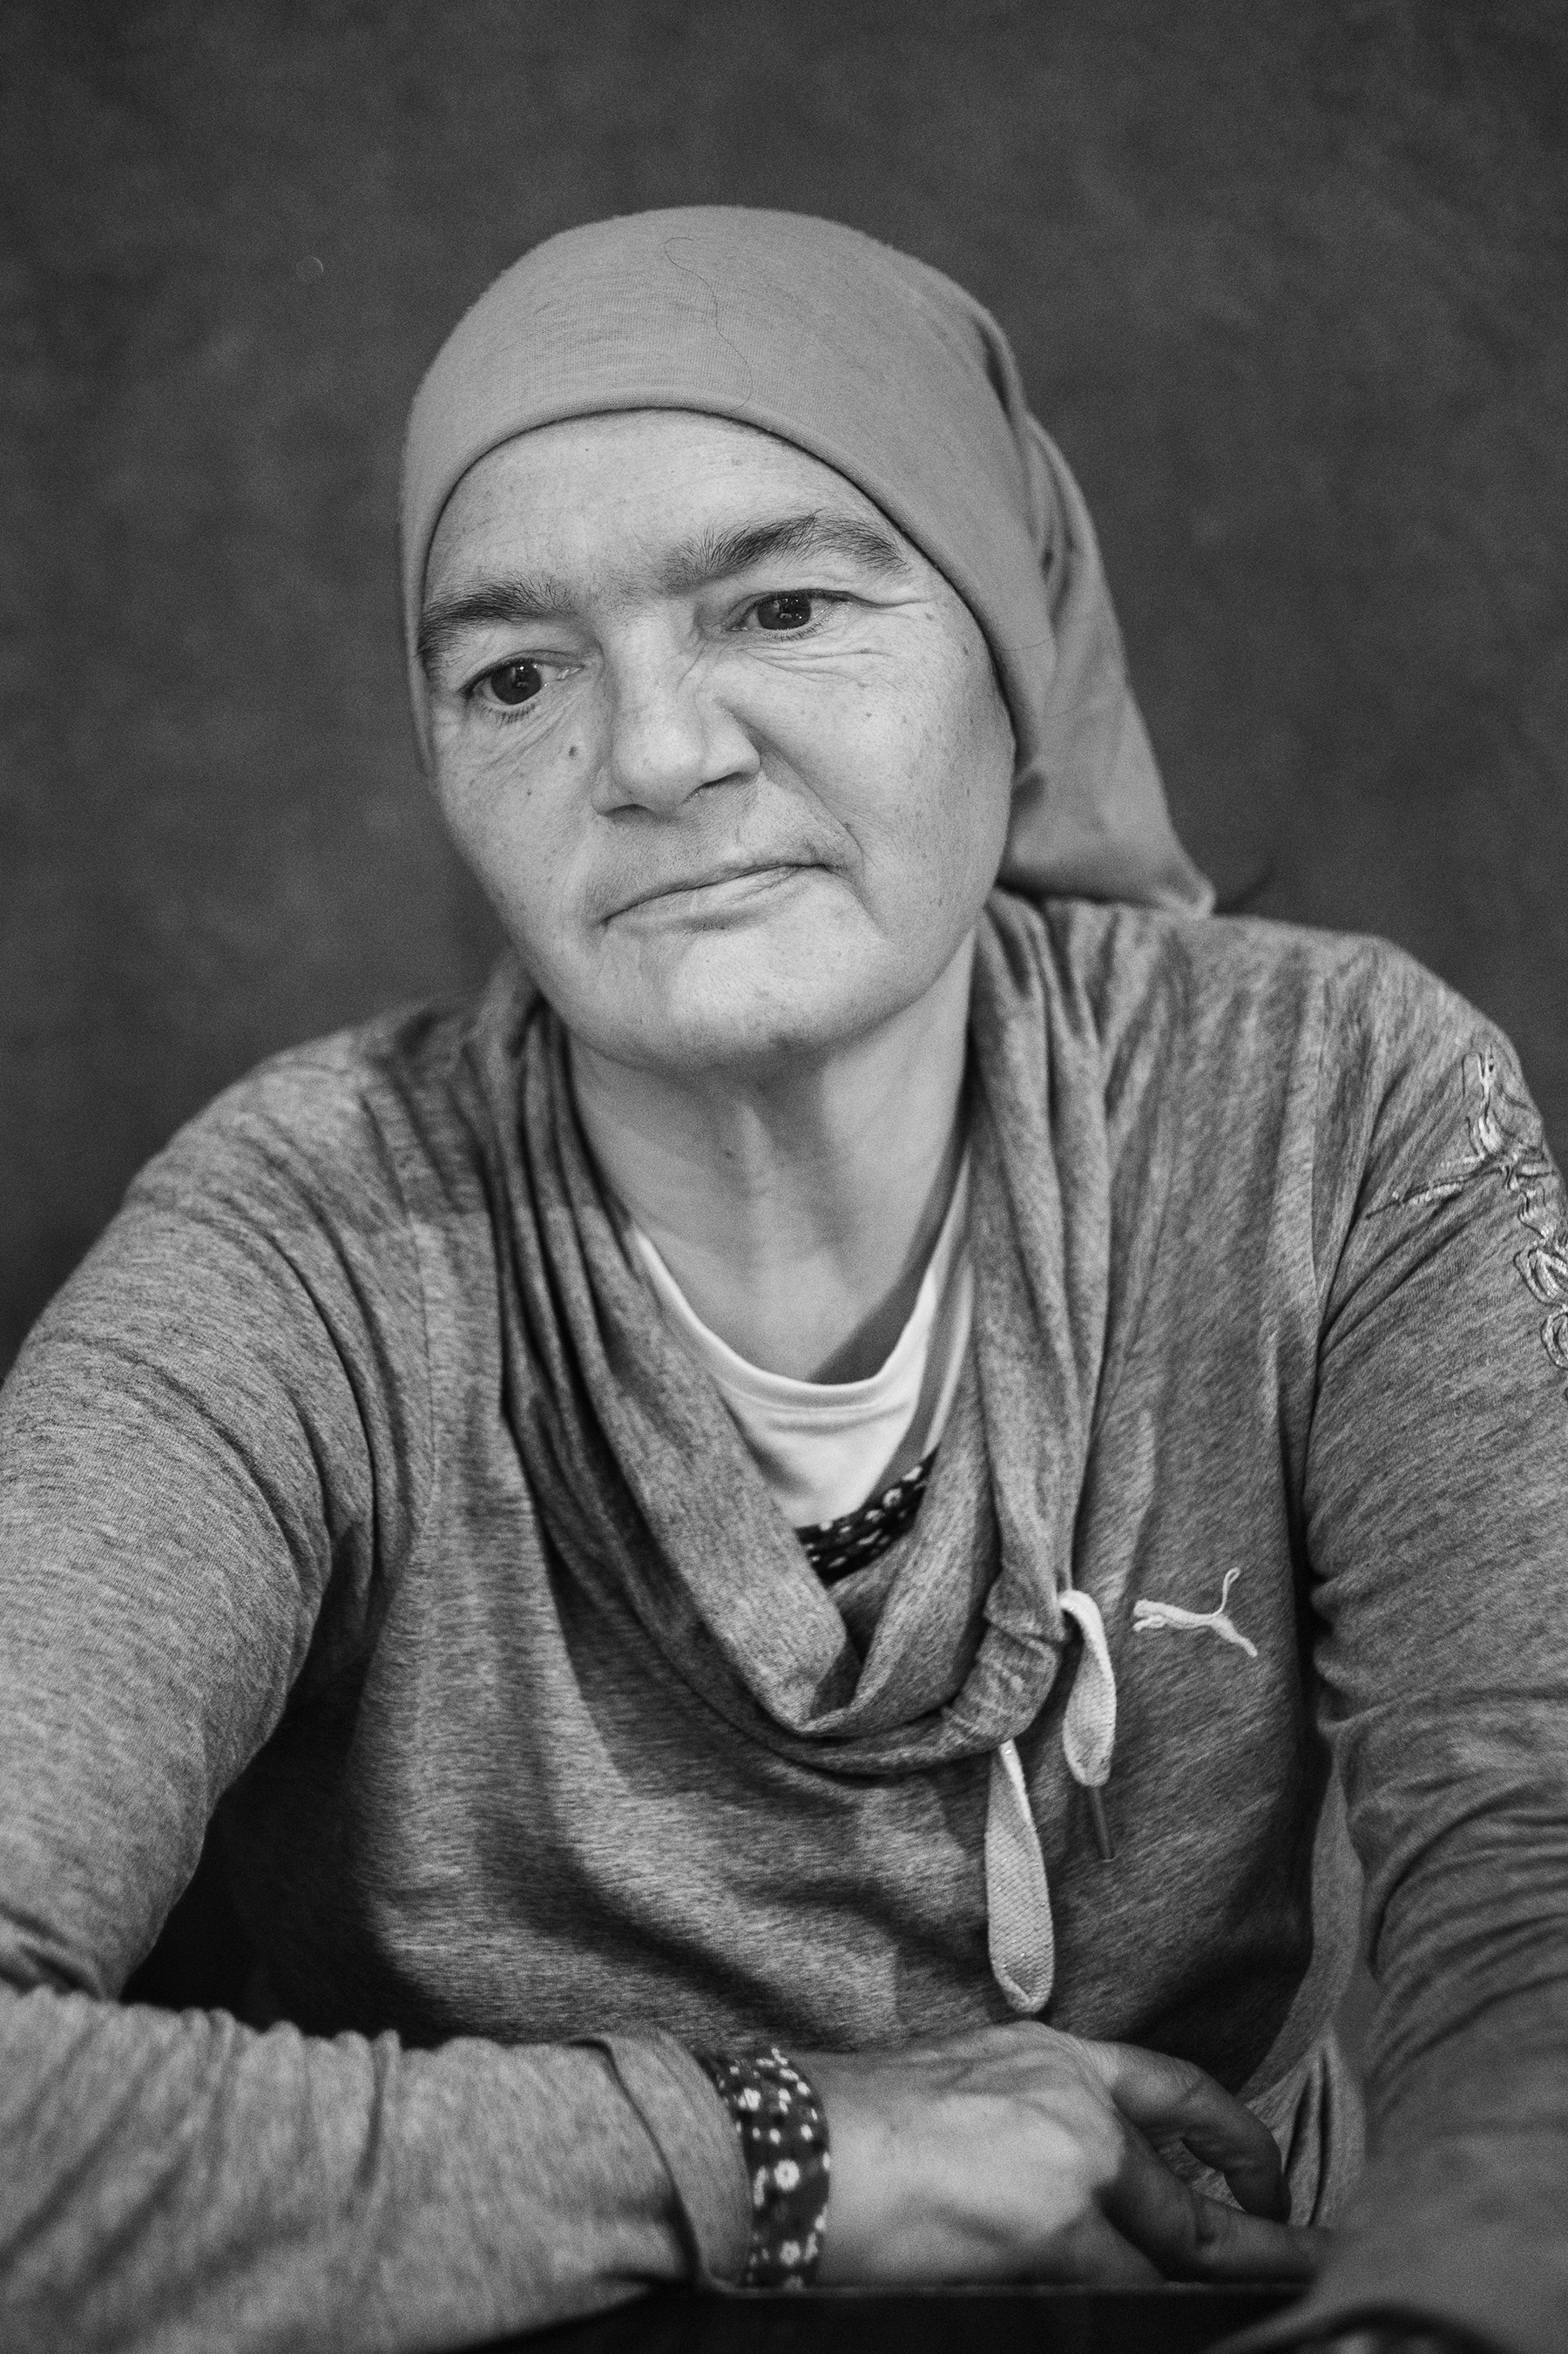  Tiziana Sfreddo (59) portrayed in the district of San Salvario in Turin, Italy; November 2018.
Ms. Sfreddo lived 4 years in an occupied abandoned factory; at the beginning of her life on the streets, she stayed 3 months without a proper shower, befo